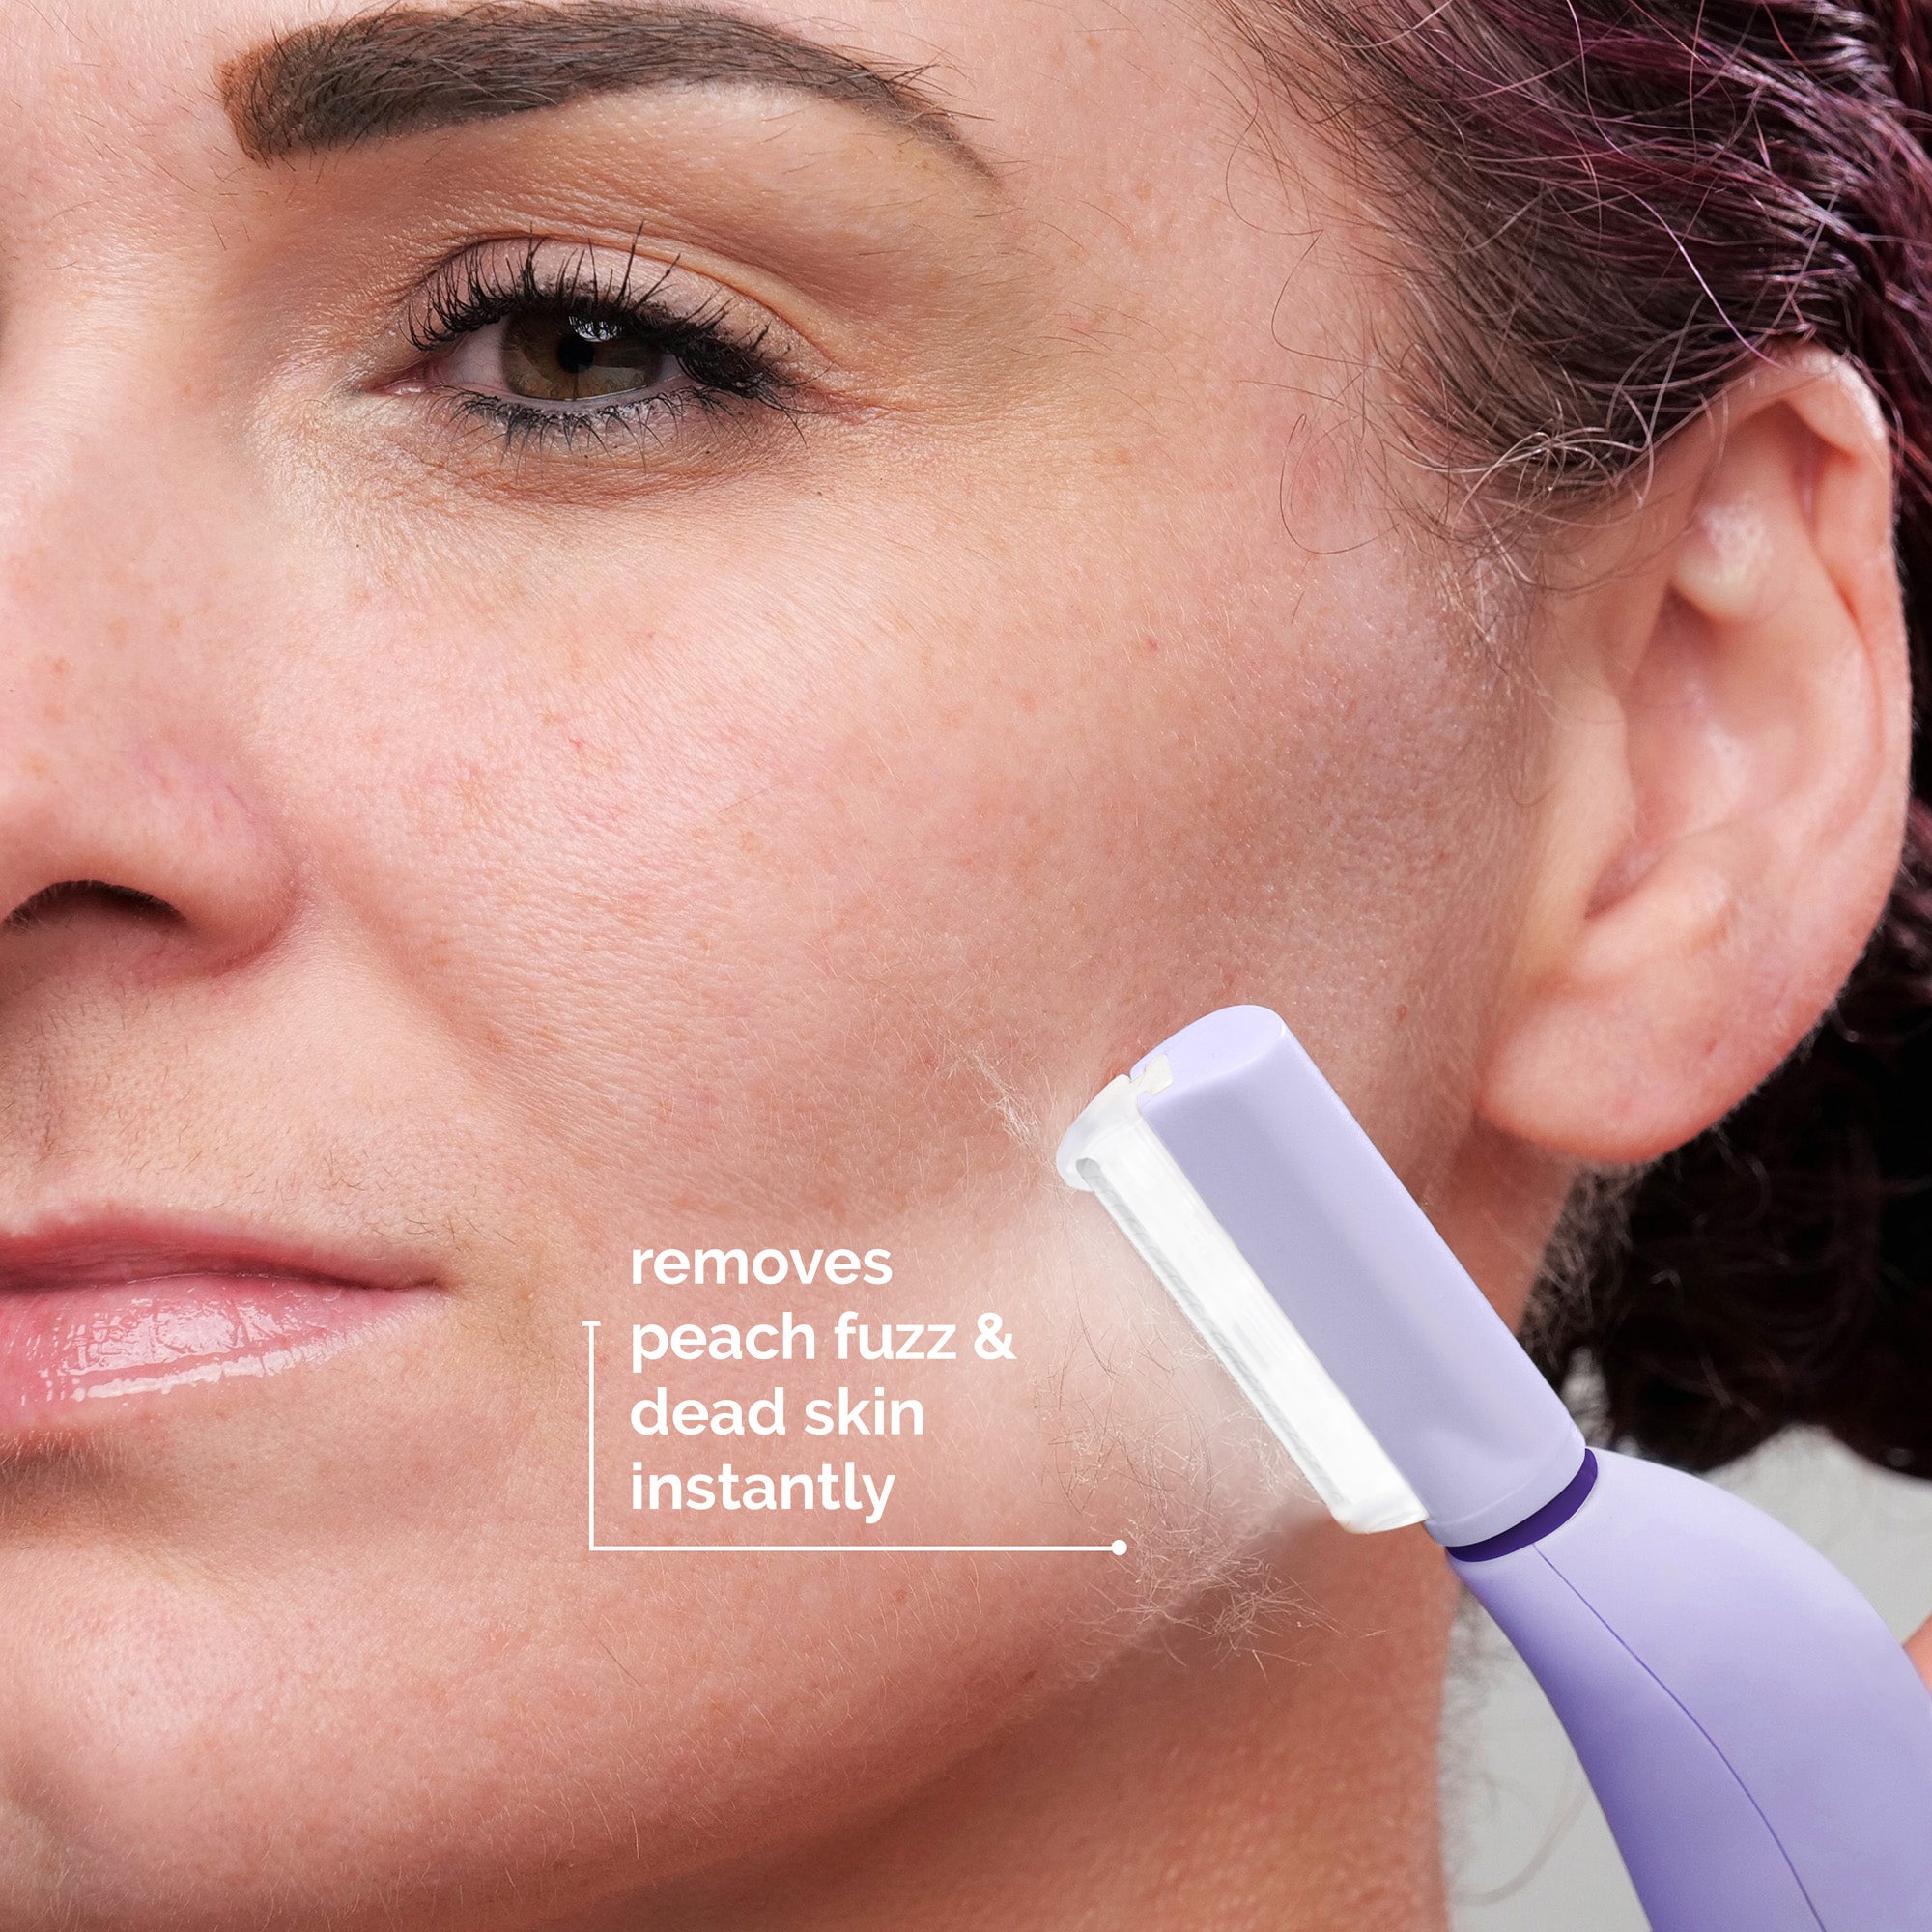 Lavender Lust . Close-up of a woman using a Sonicsmooth Pro+ by Michael Todd Beauty on her cheek, with text describing the device's function of removing peach fuzz and dead skin.